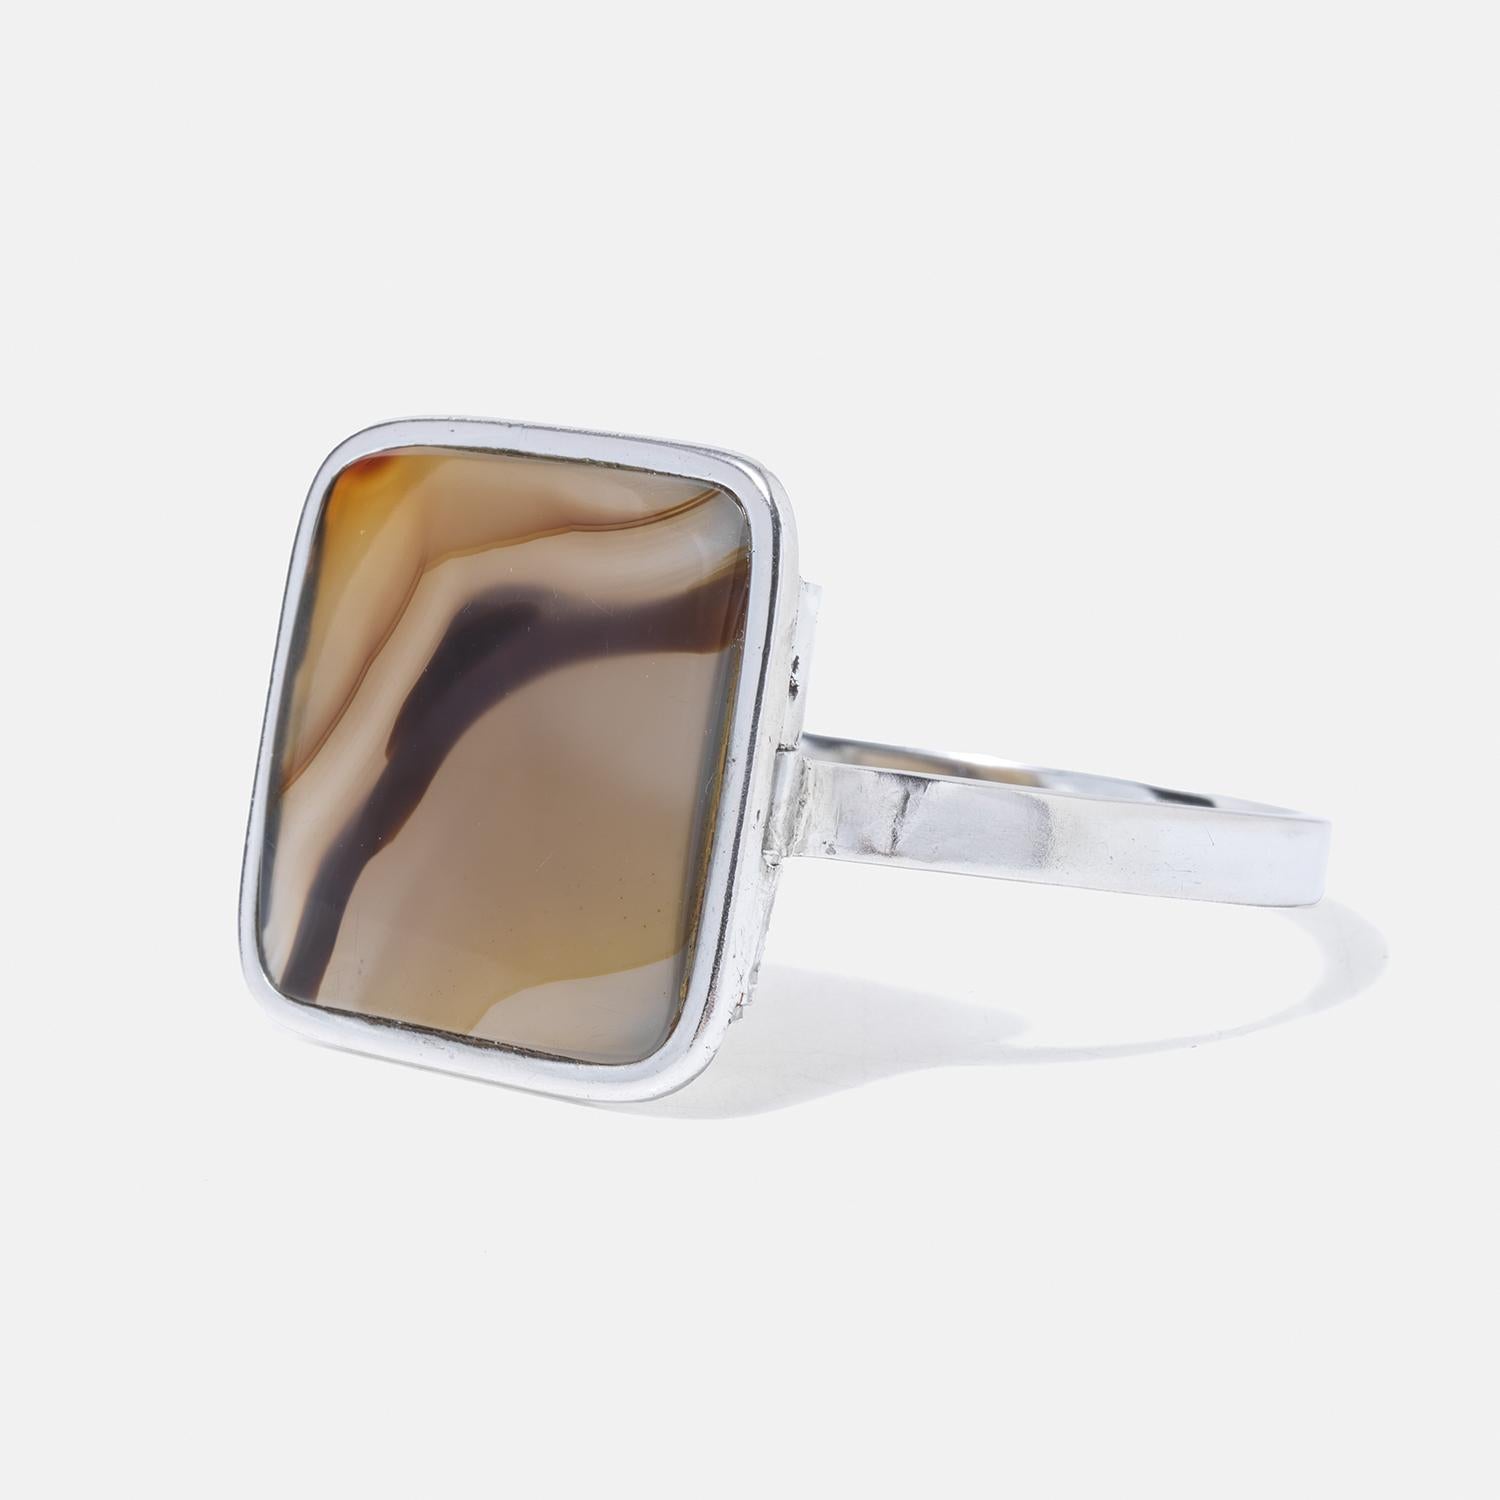 Vintage Silver and Tiger Eye Bracelet by Christian Lacroix, 1970s For Sale 2